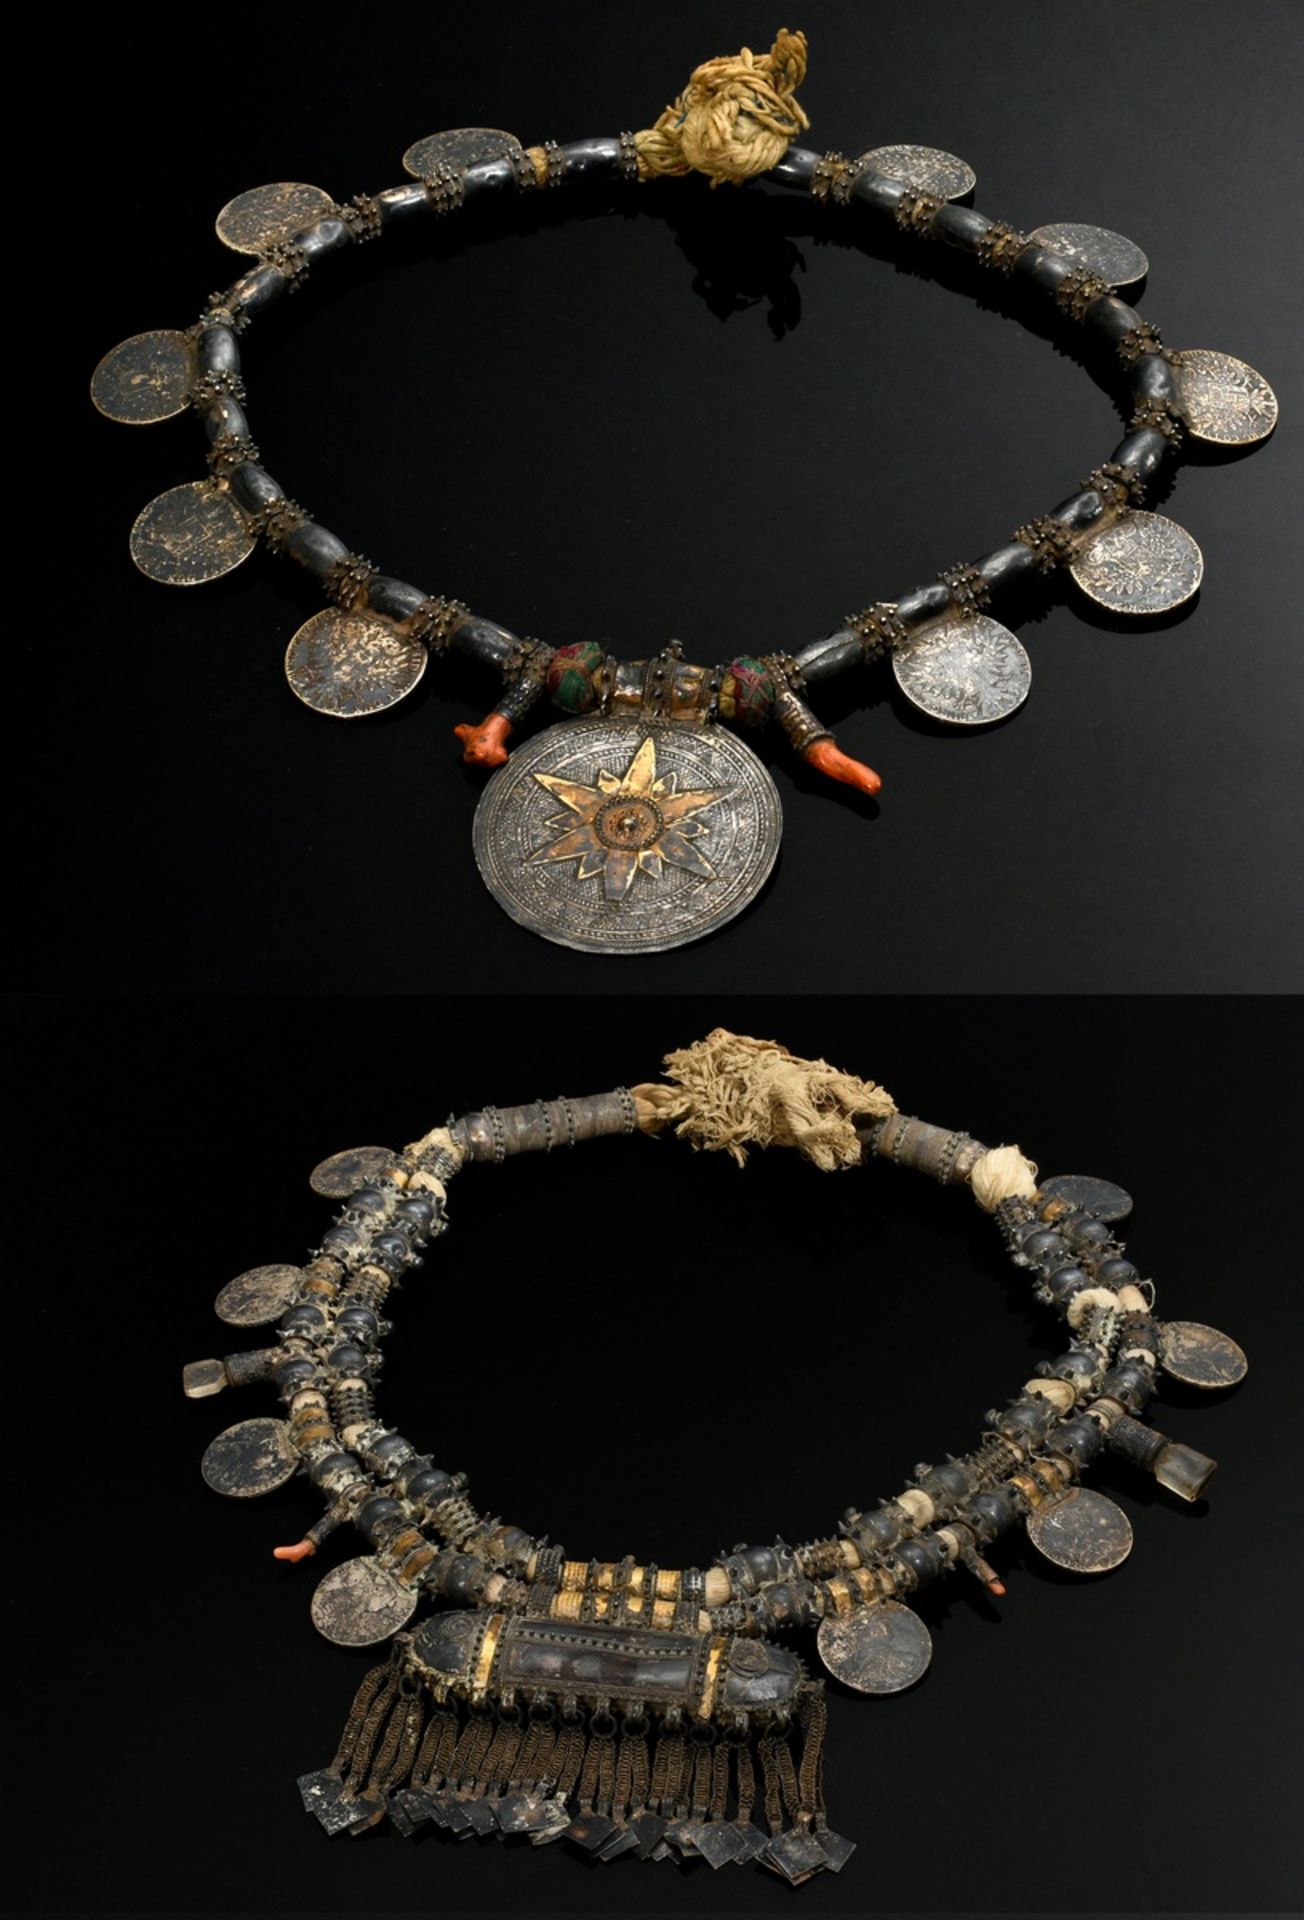 2 Various necklaces "Hirz" or "Sumpt", Oman Wahiba sand Bedouins, large spiked beads with Maria The